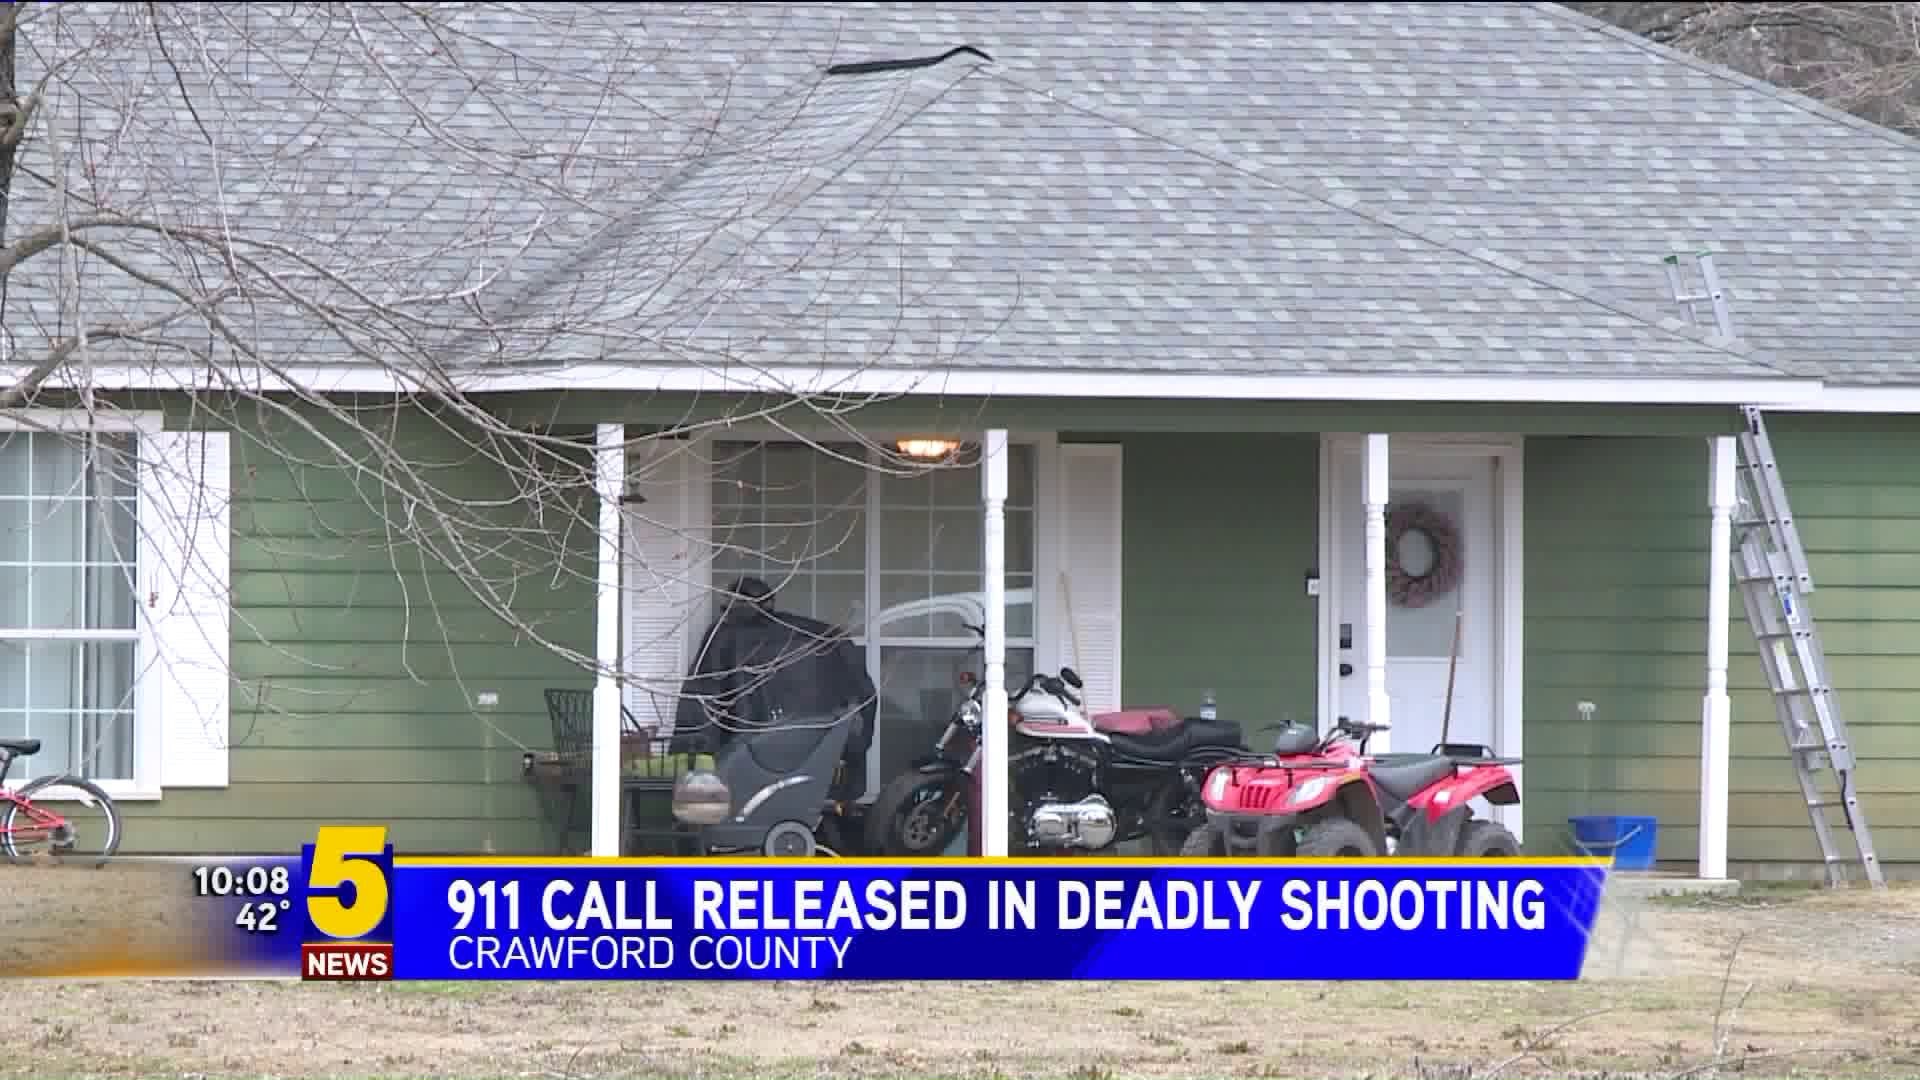 911 Call Released In Deadly Shooting